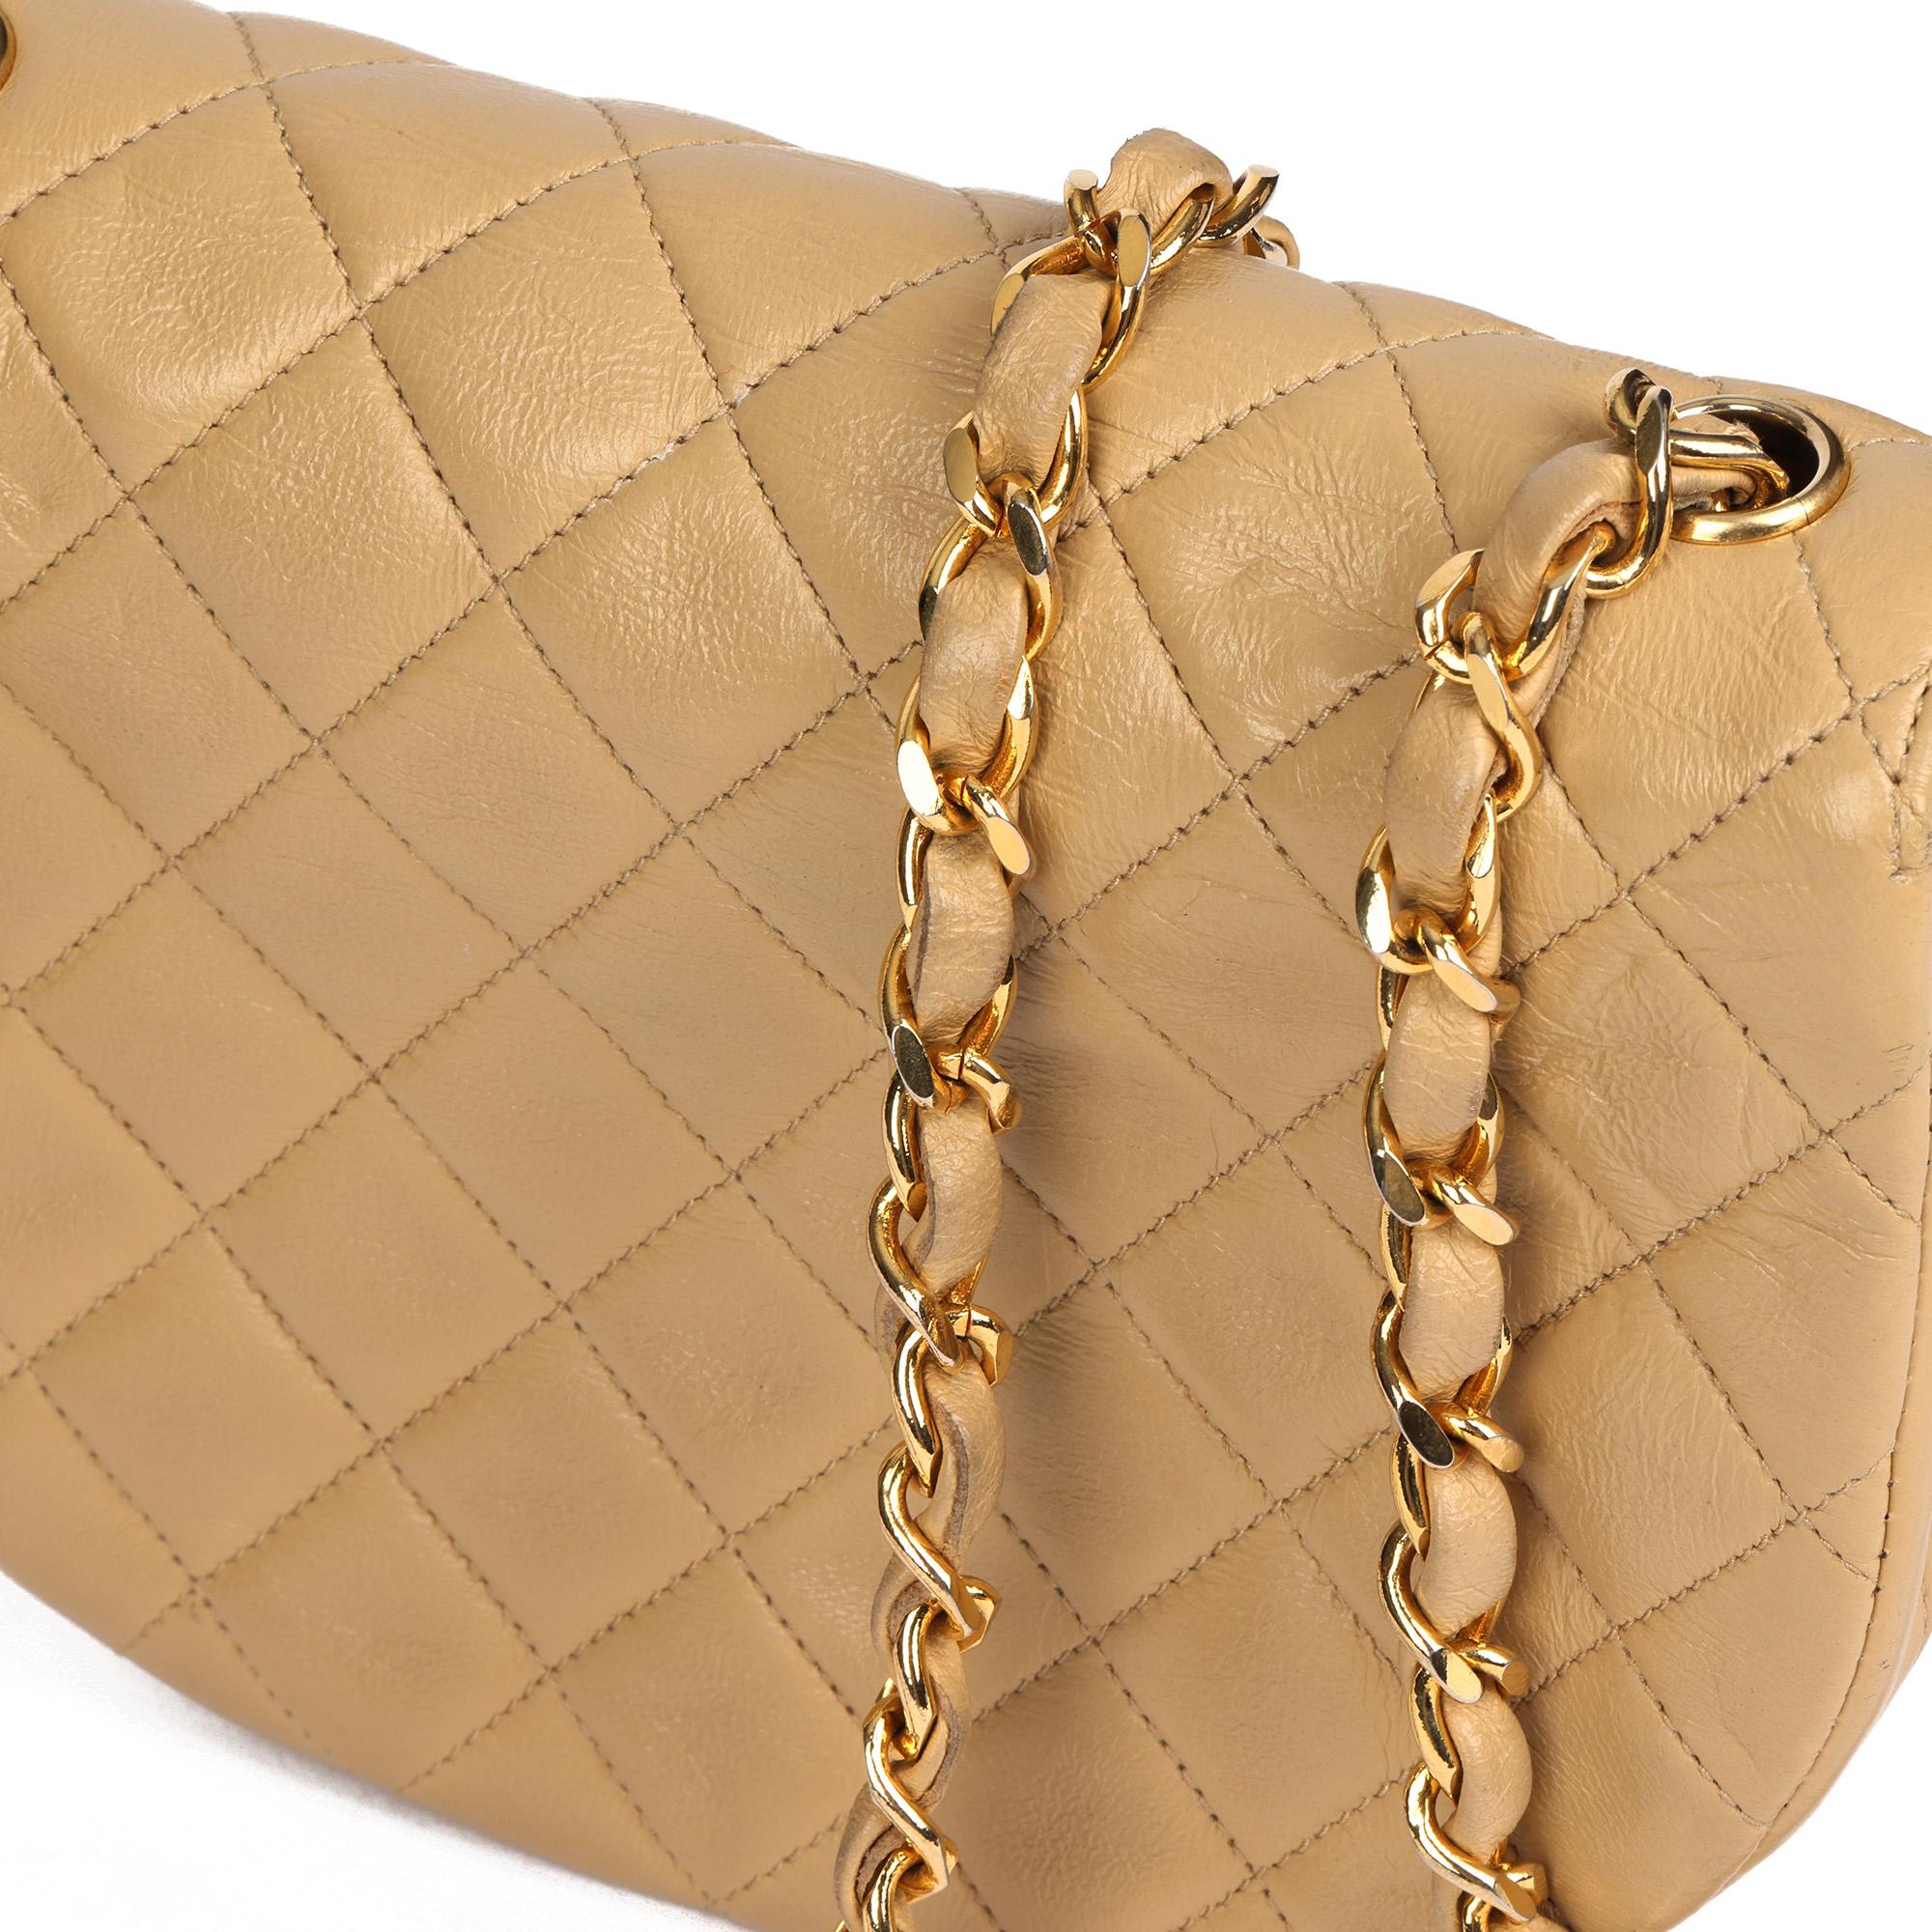 CHANEL Beige Quilted Lambskin Vintage Half Moon Mini Flap Bag  For Sale 1